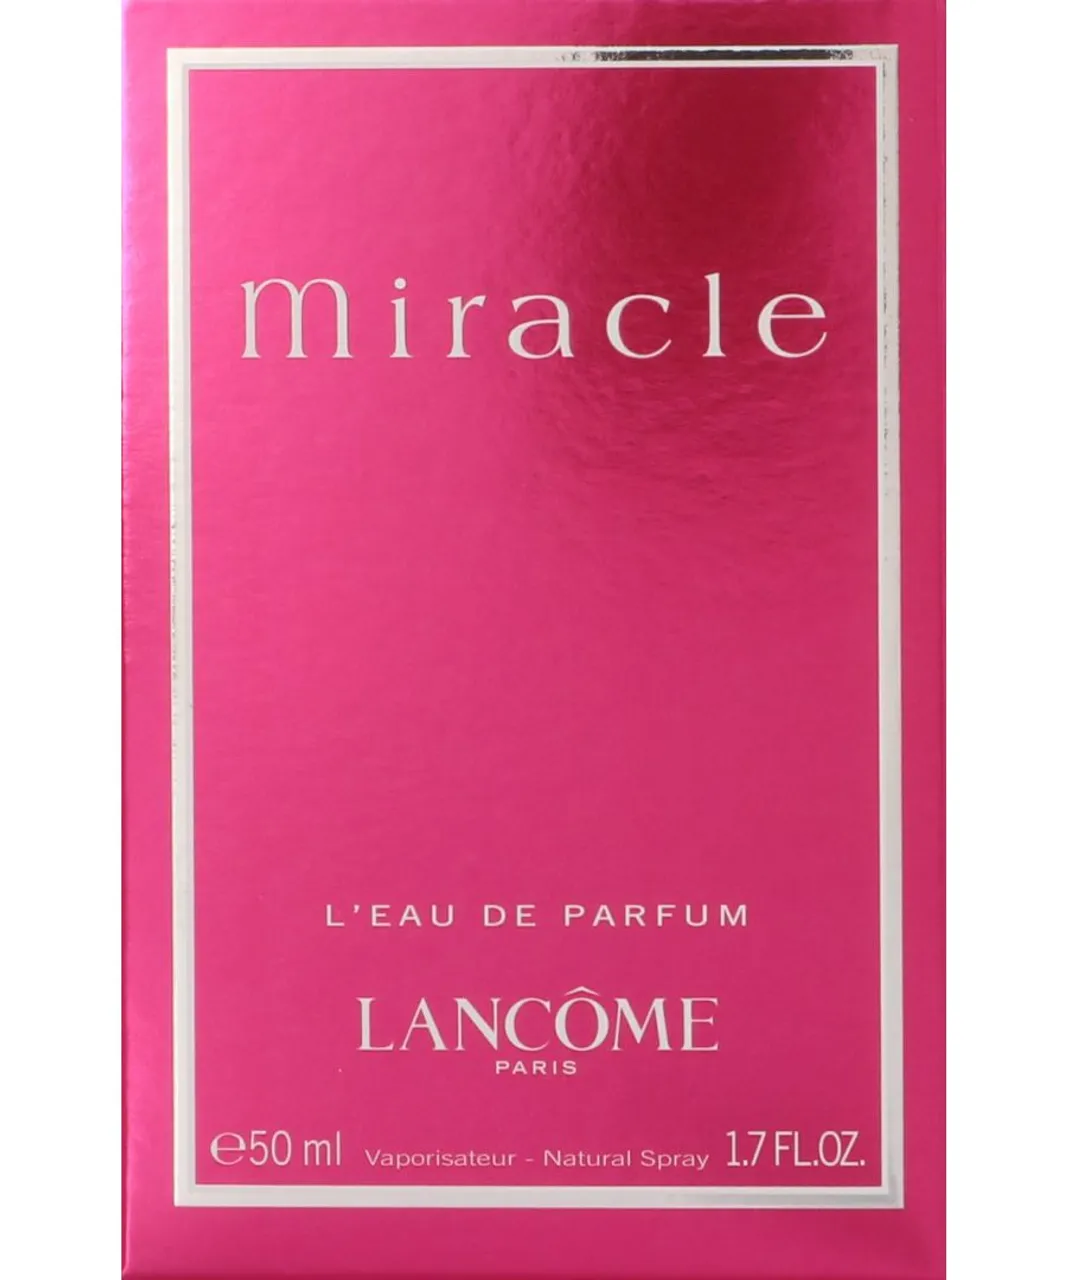 Lancome Womens Miracle Eau de Parfum 50ml Spray For Her - NA - One Size